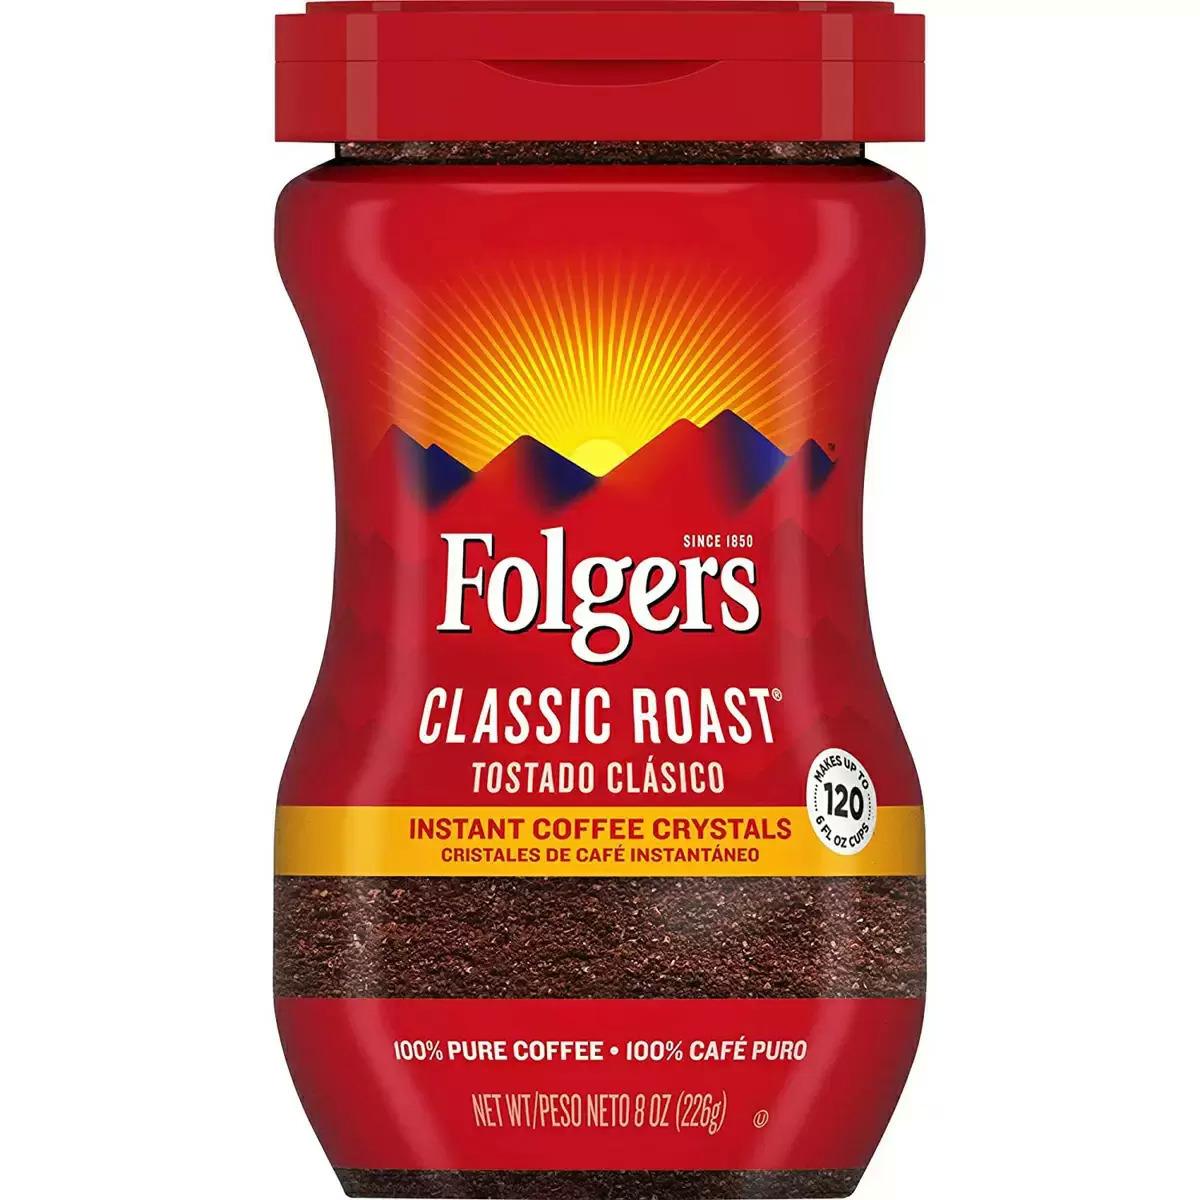 Folgers Classic Roast Instant Coffee Crystals for $3.74 Shipped